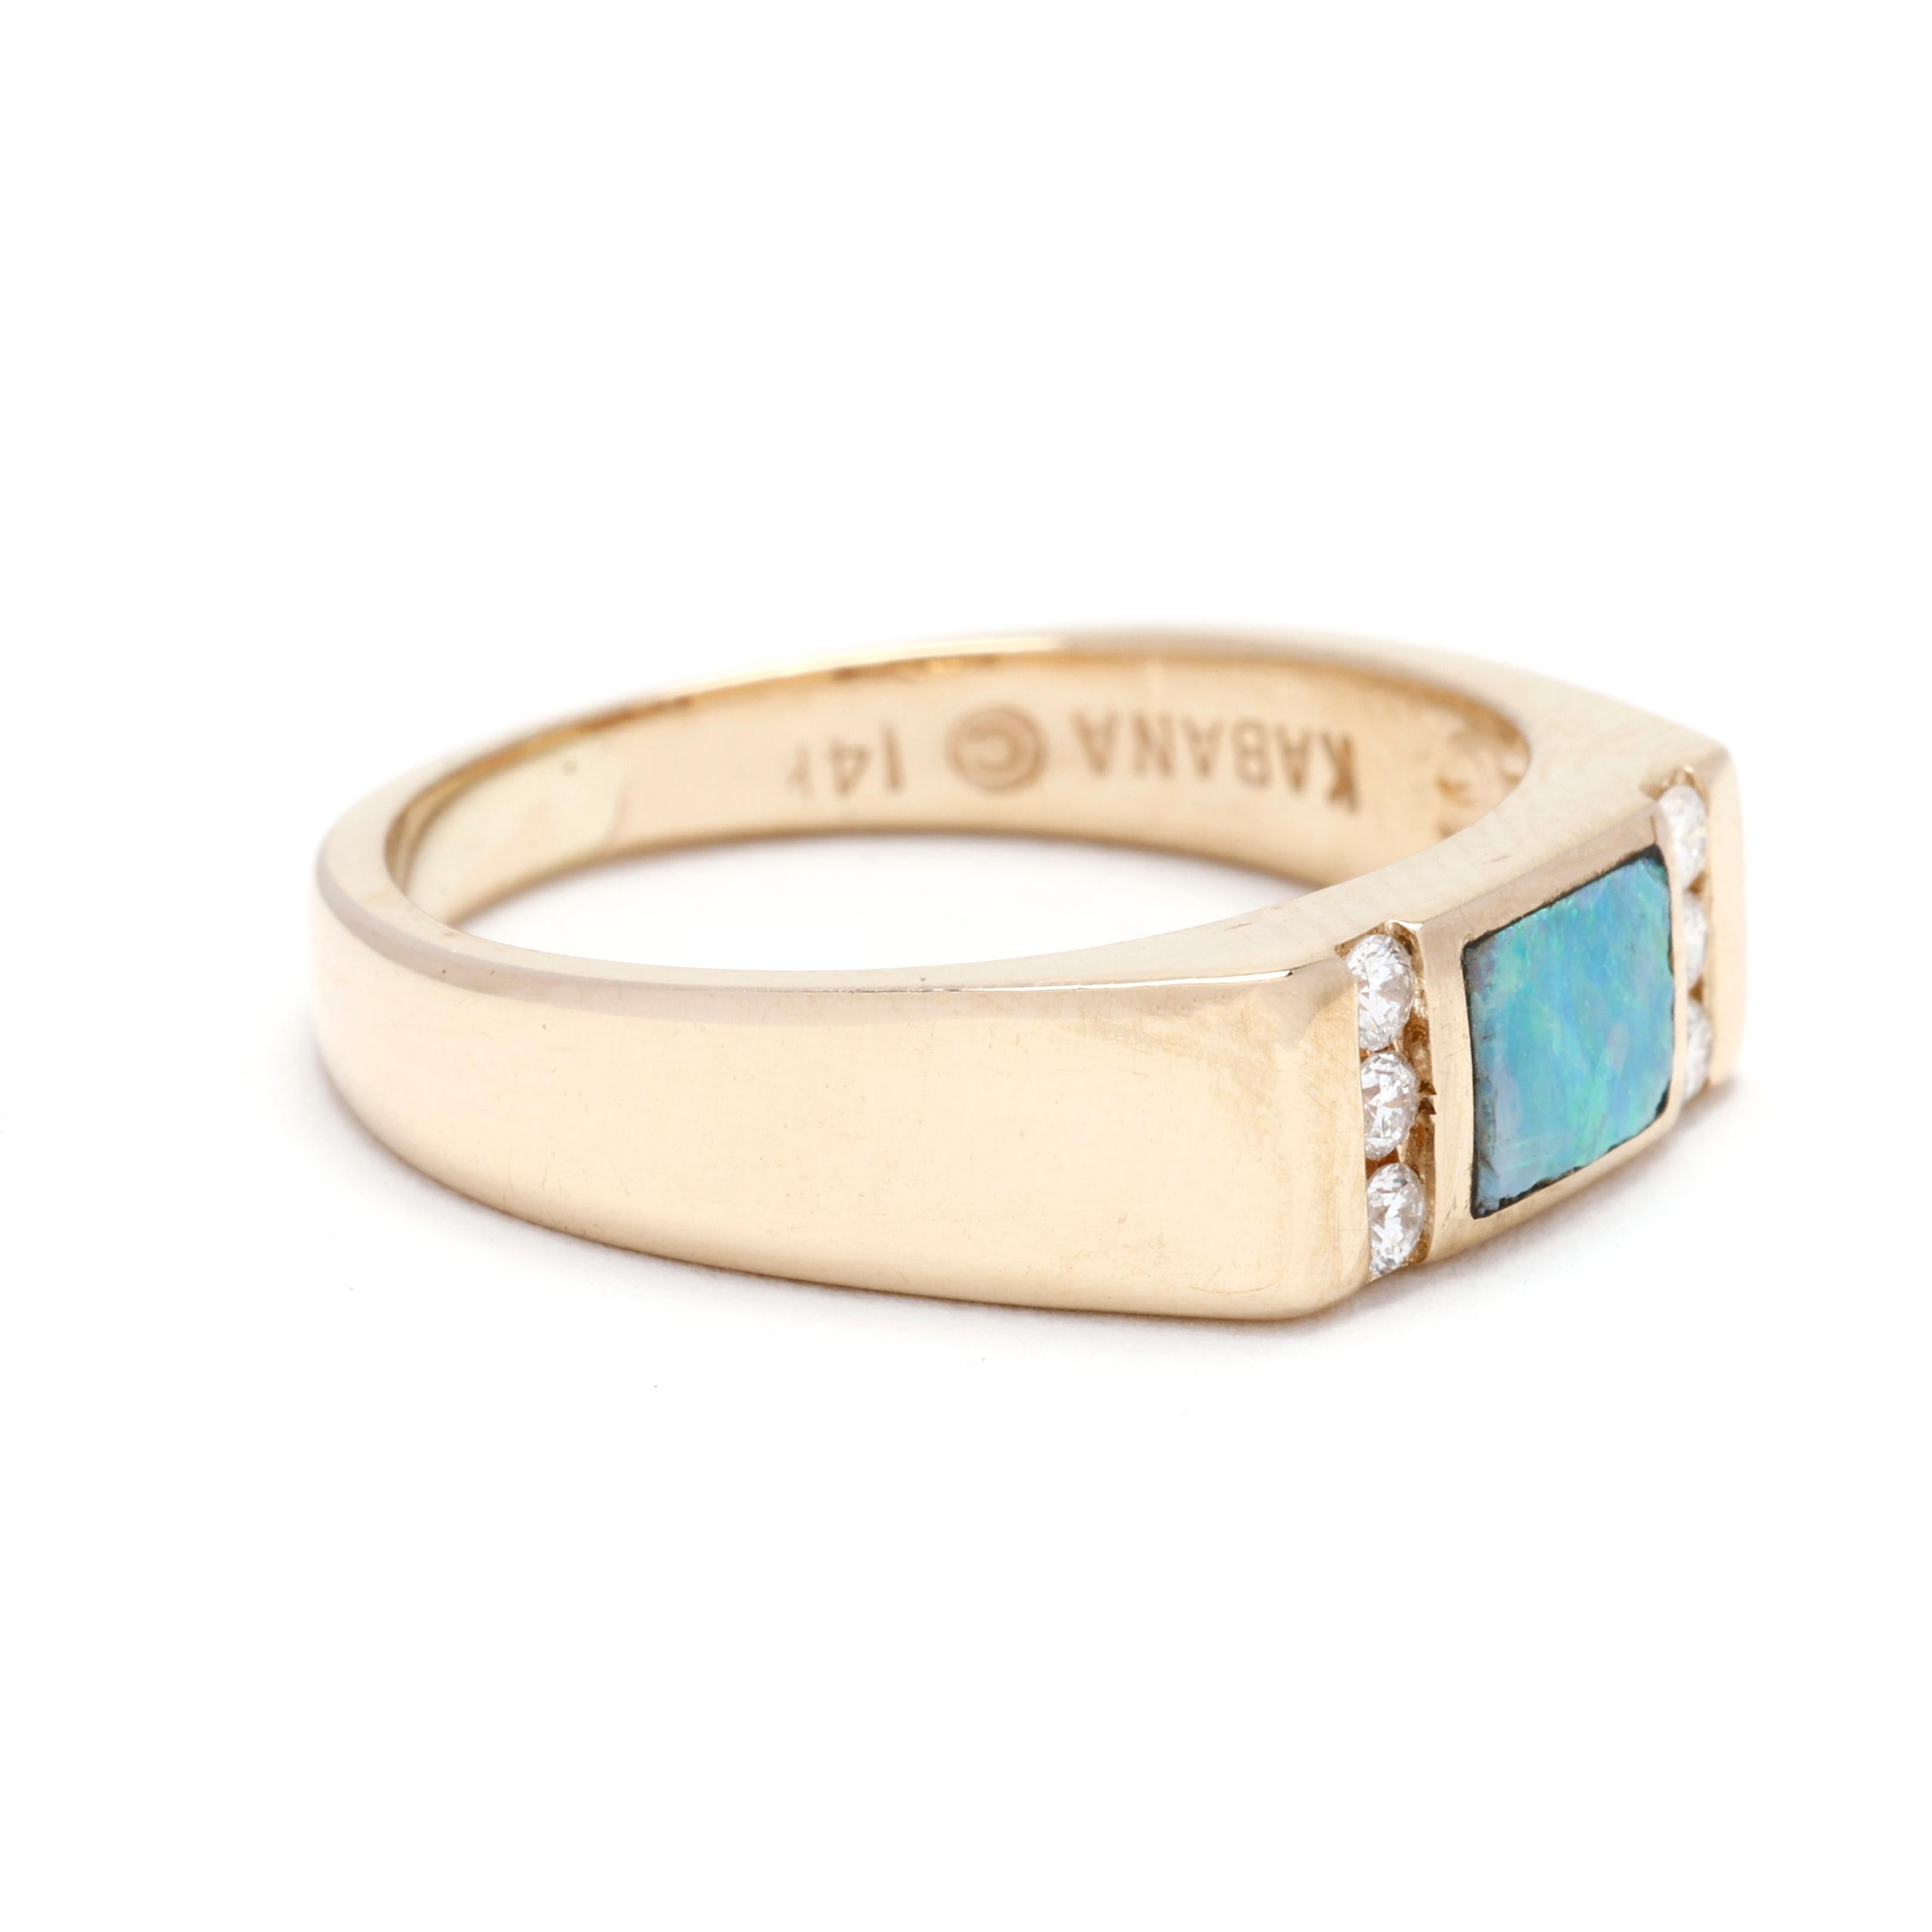 Embrace the enchanting beauty of this Rainbow Opal and Diamond Rectangular Band Ring. Expertly crafted in lustrous 14k yellow gold, this stunning ring features a mesmerizing rectangular opal centerpiece adorned with sparkling diamonds, showcasing a